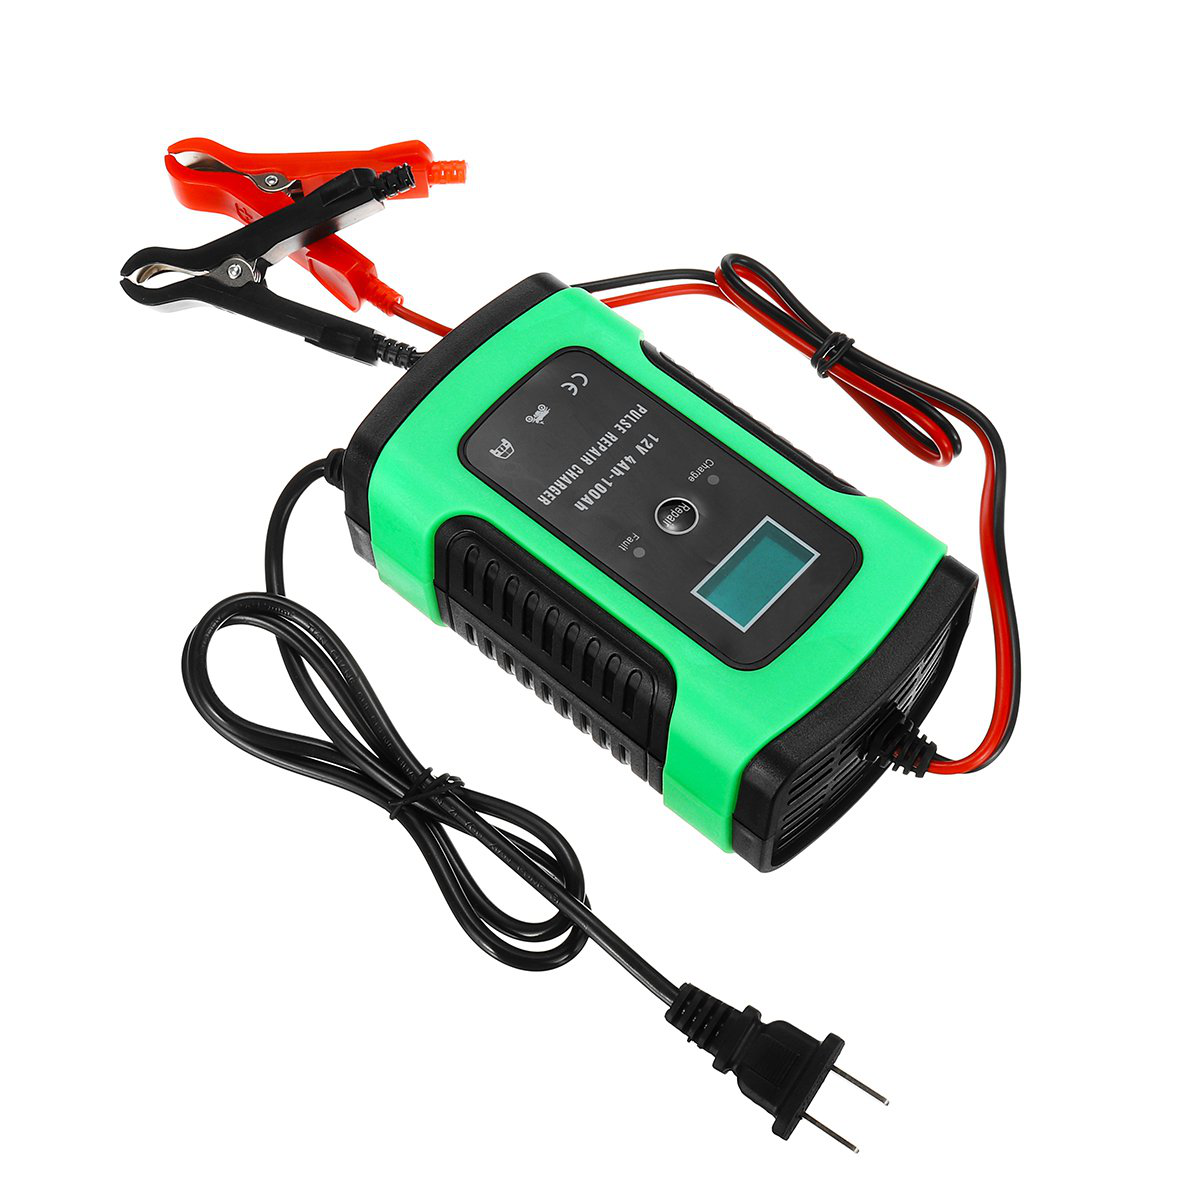 Enusic™ 12V 6A Pulse Repair LCD Battery Charger for Car Motorcycle Lead Acid Battery Agm Gel Wet